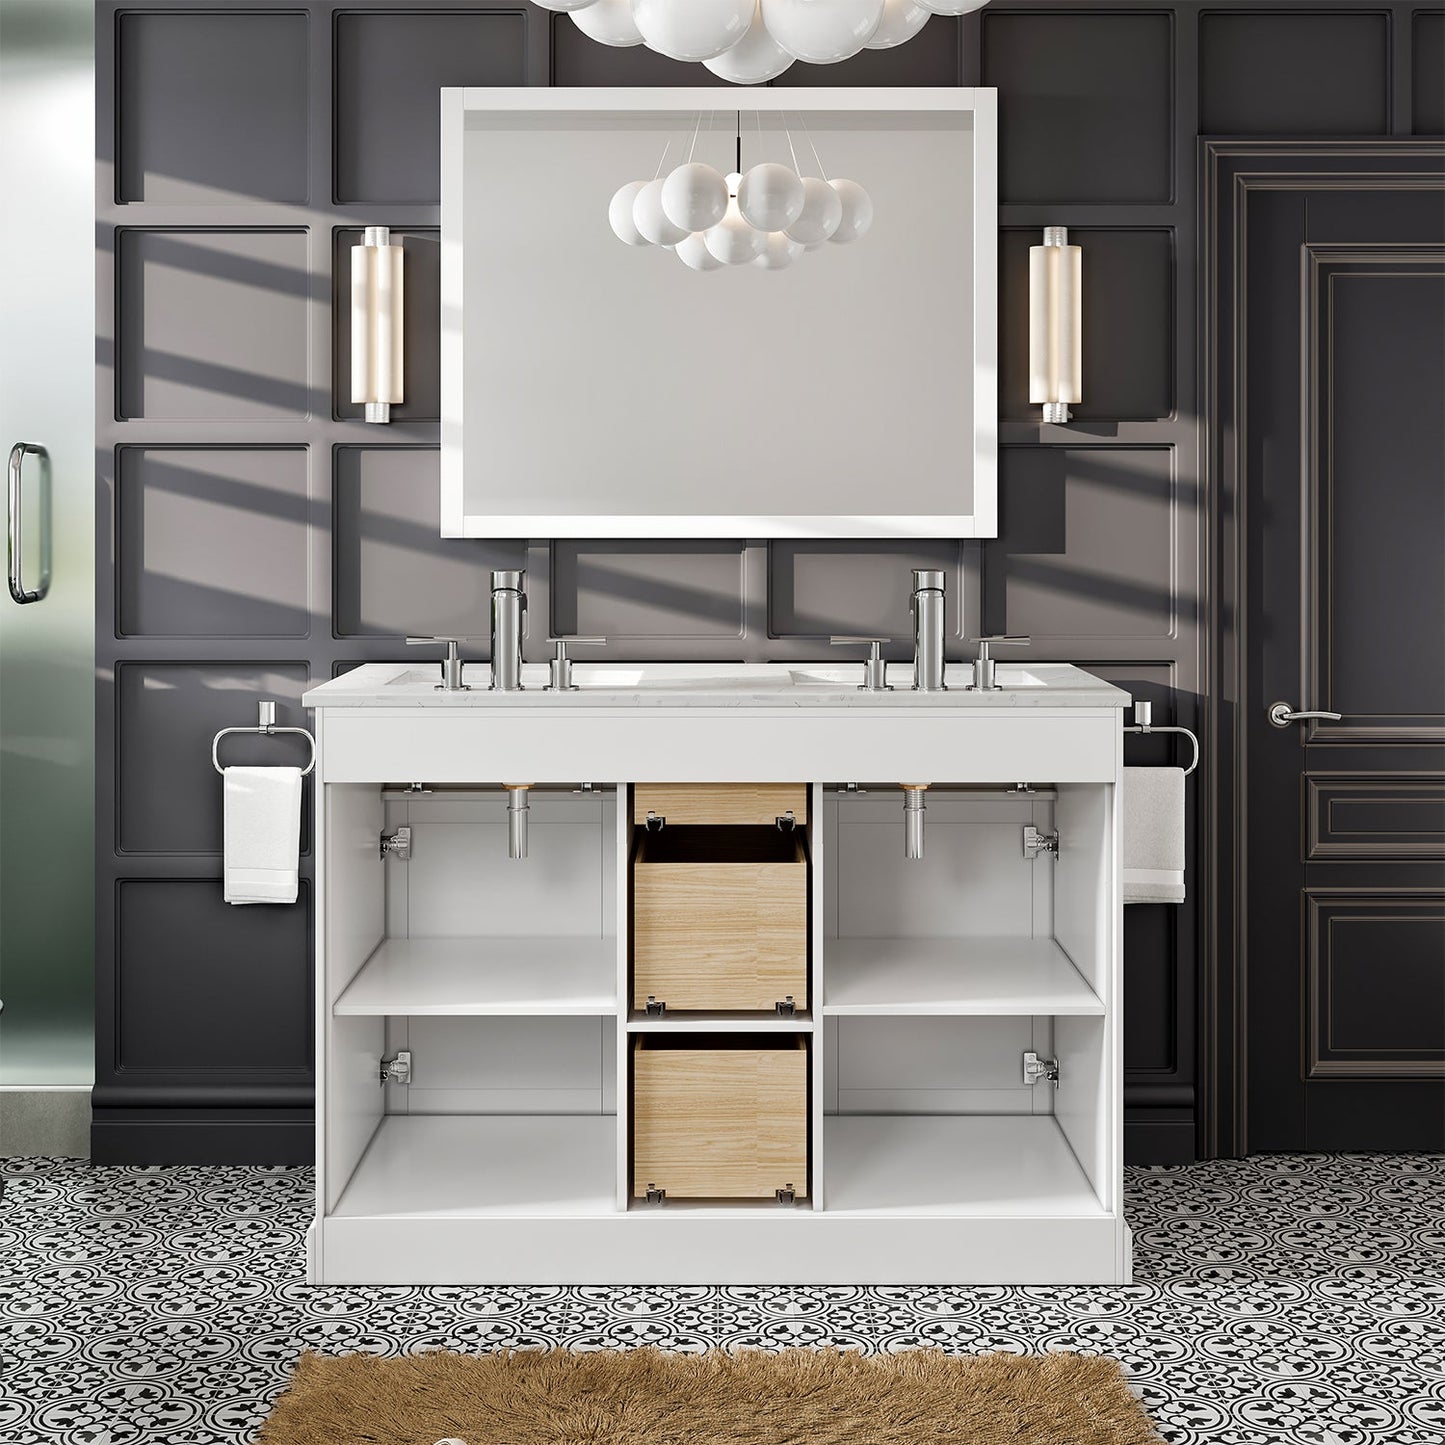 Eviva Epic 48 inch Transitional White Bathroom Vanity with Brushed Nickel Handles